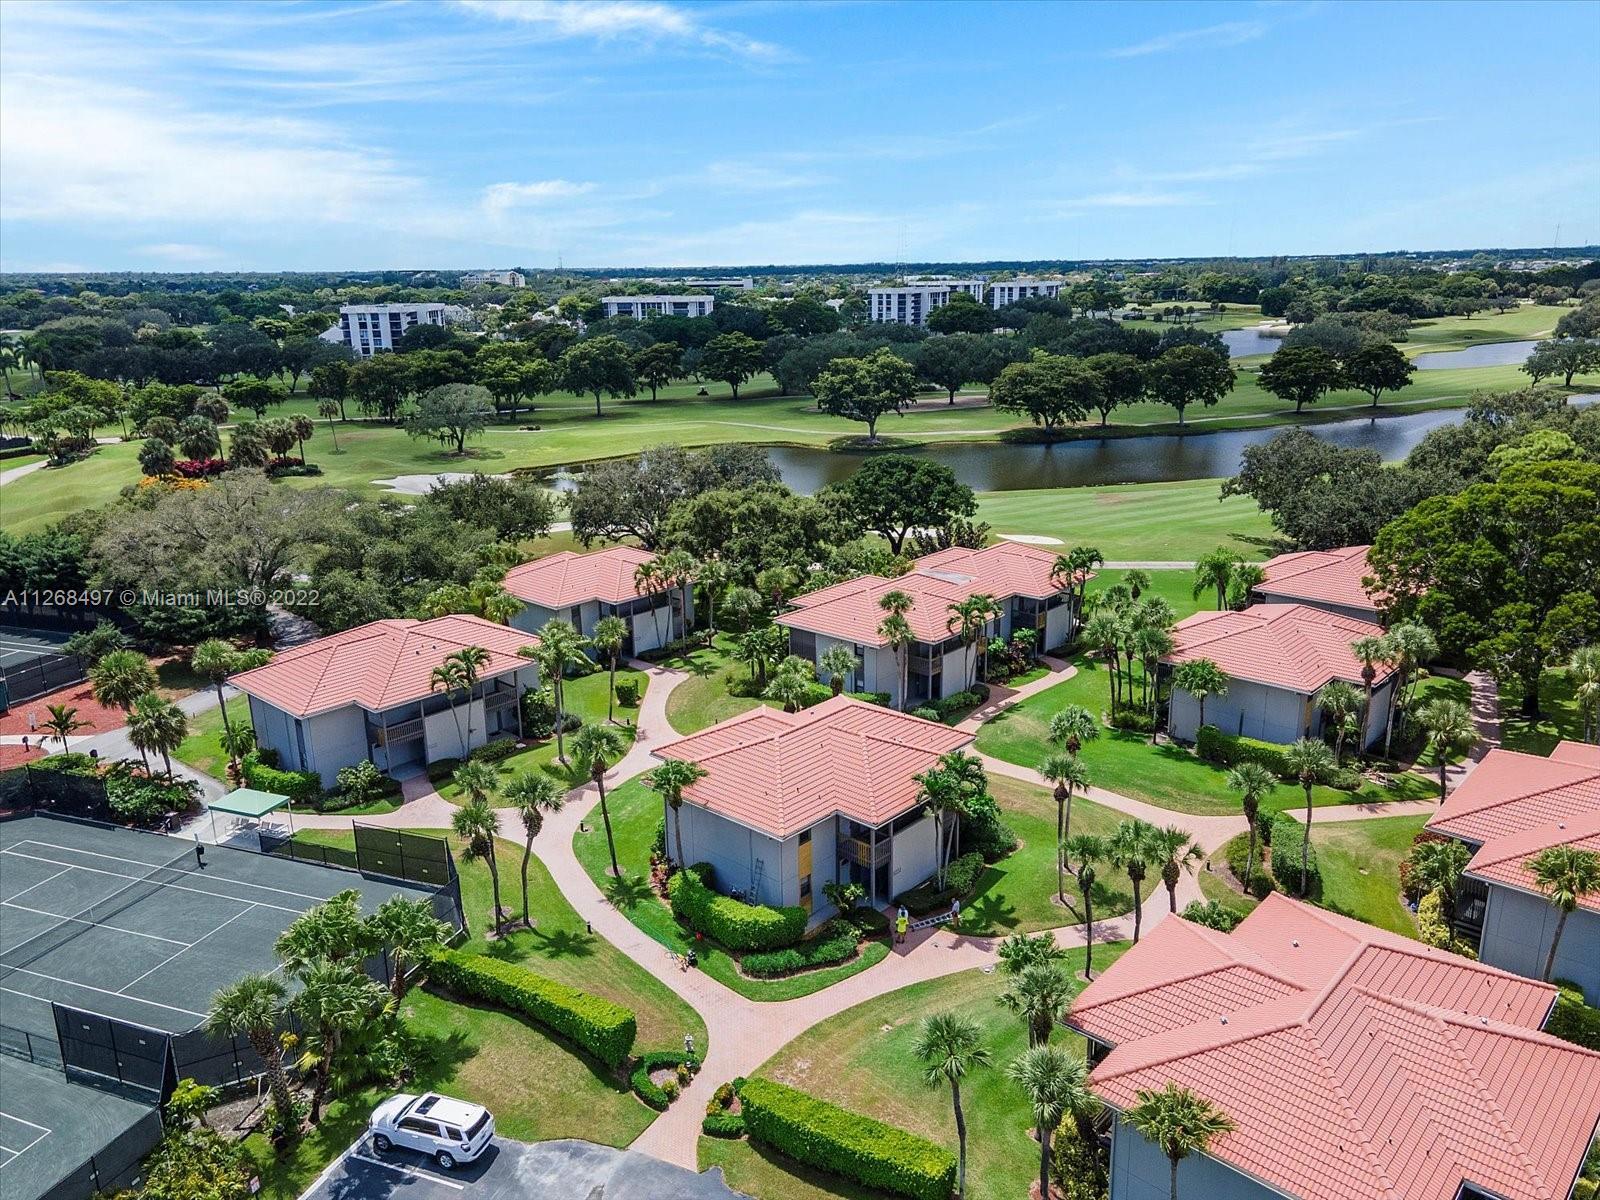 Spectacular renovated and bright Courtside Condo.  Located at Boca West Country Club.  This spacious